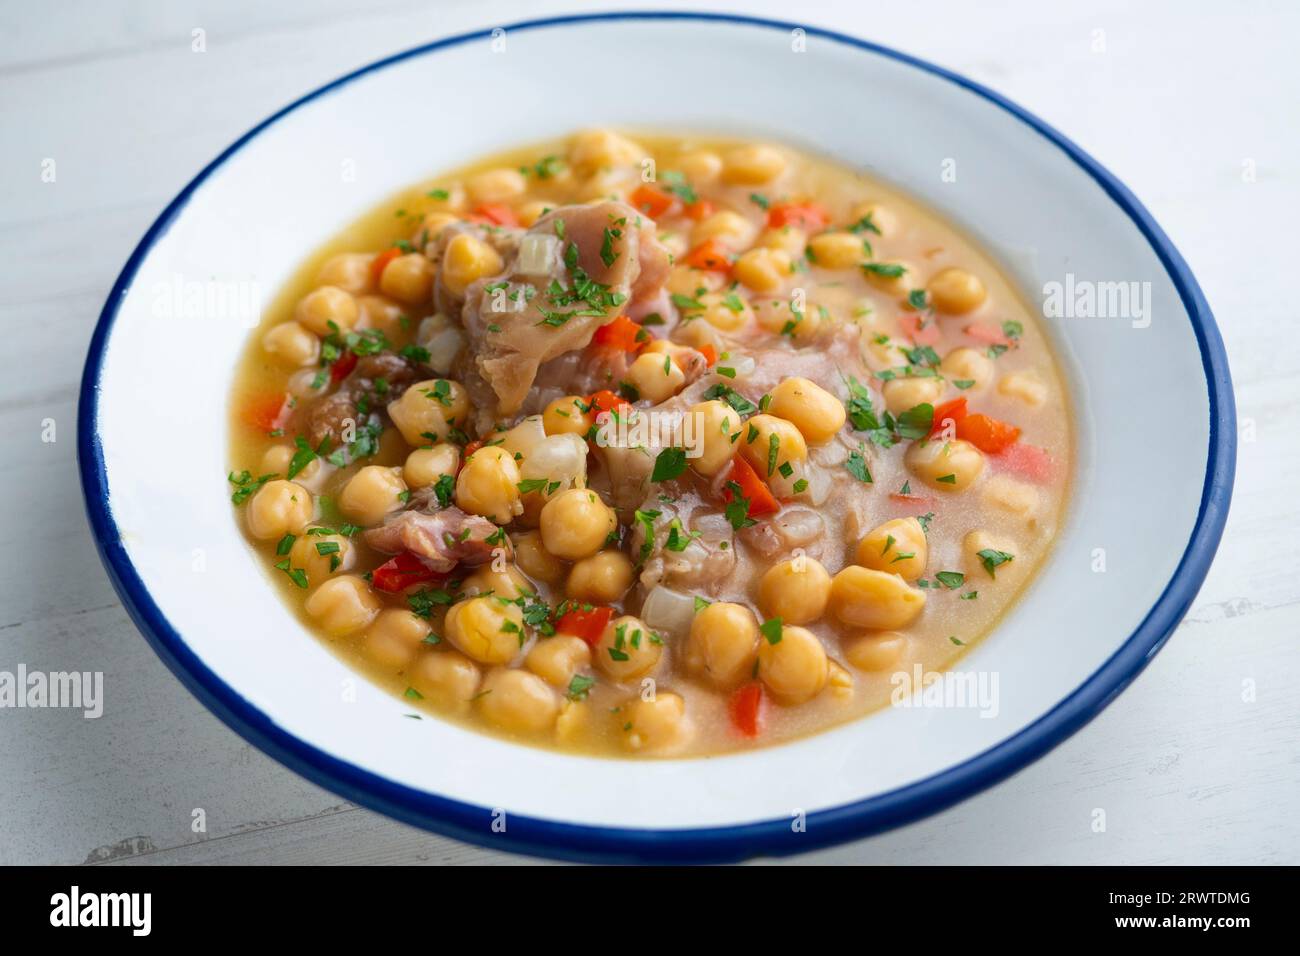 Stewed chickpeas with pig's feet. Traditional recipe from northern Spain. Stock Photo